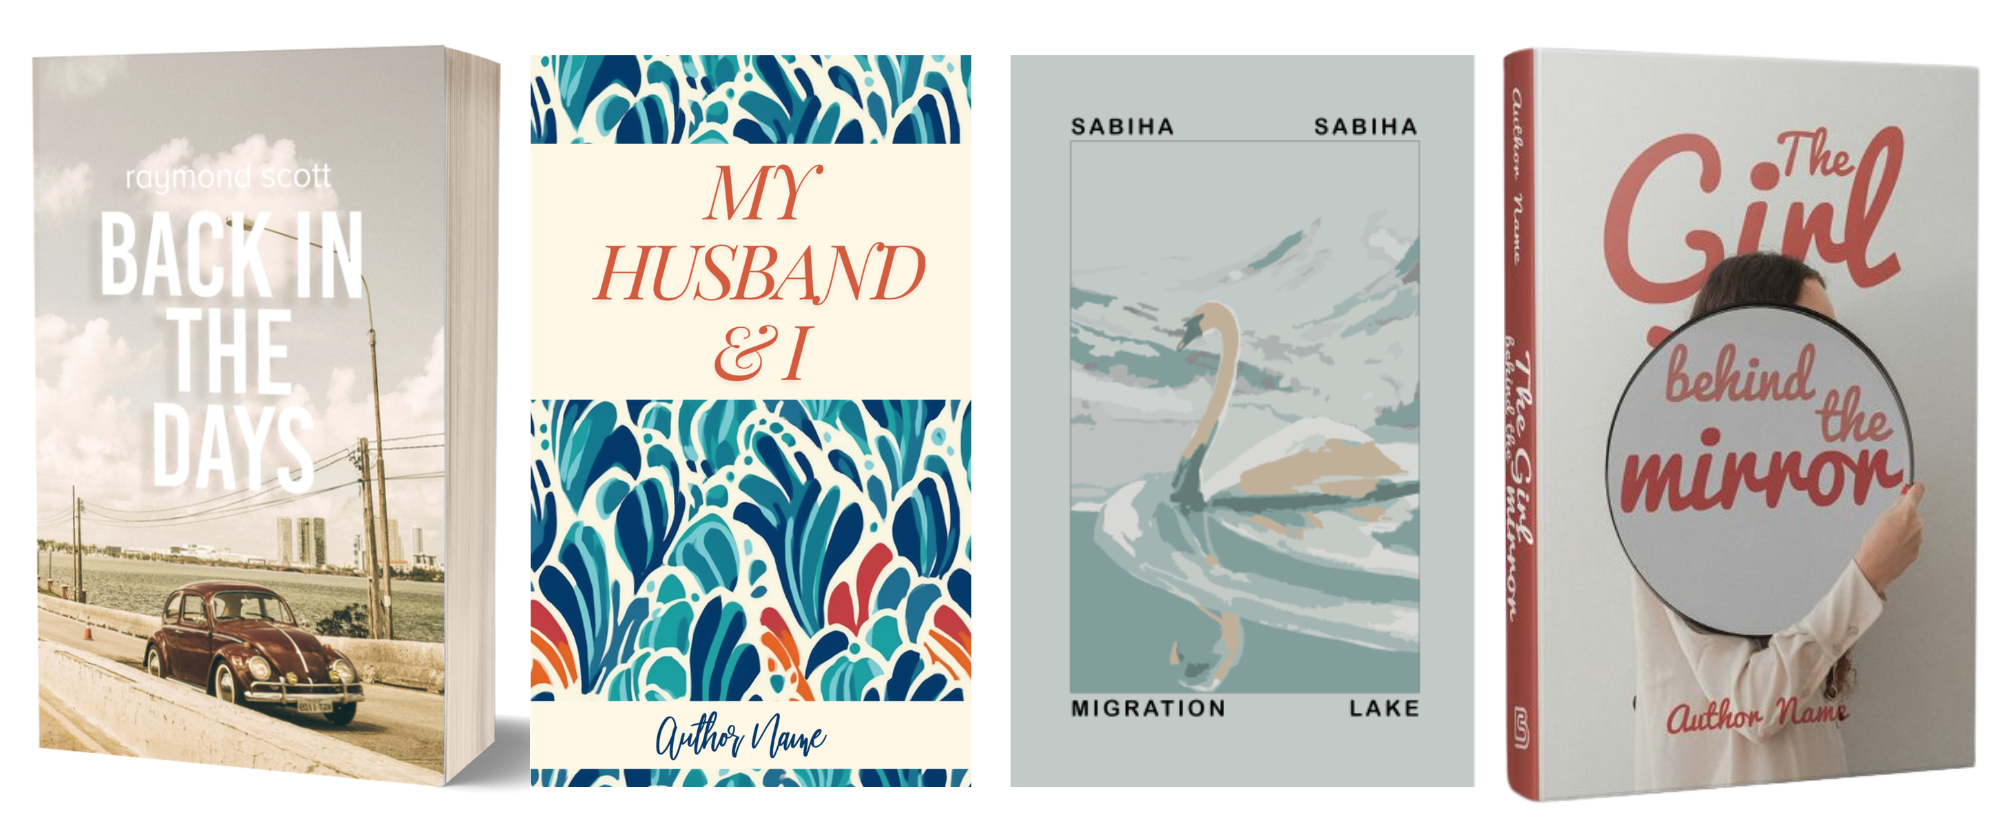 A set of four book covers. From left to right: "Back in the Days" by Raymond Scott features a vintage car on a road. "My Husband & I" by Author Name has a floral, leaf-patterned design. "Migration Lake" by Sabiha depicts a swan in water with mountains. "The Girl Behind the Mirror" by Author Name shows a girl facing a mirror. BookSelf Book Cover Design & Premade Book Covers